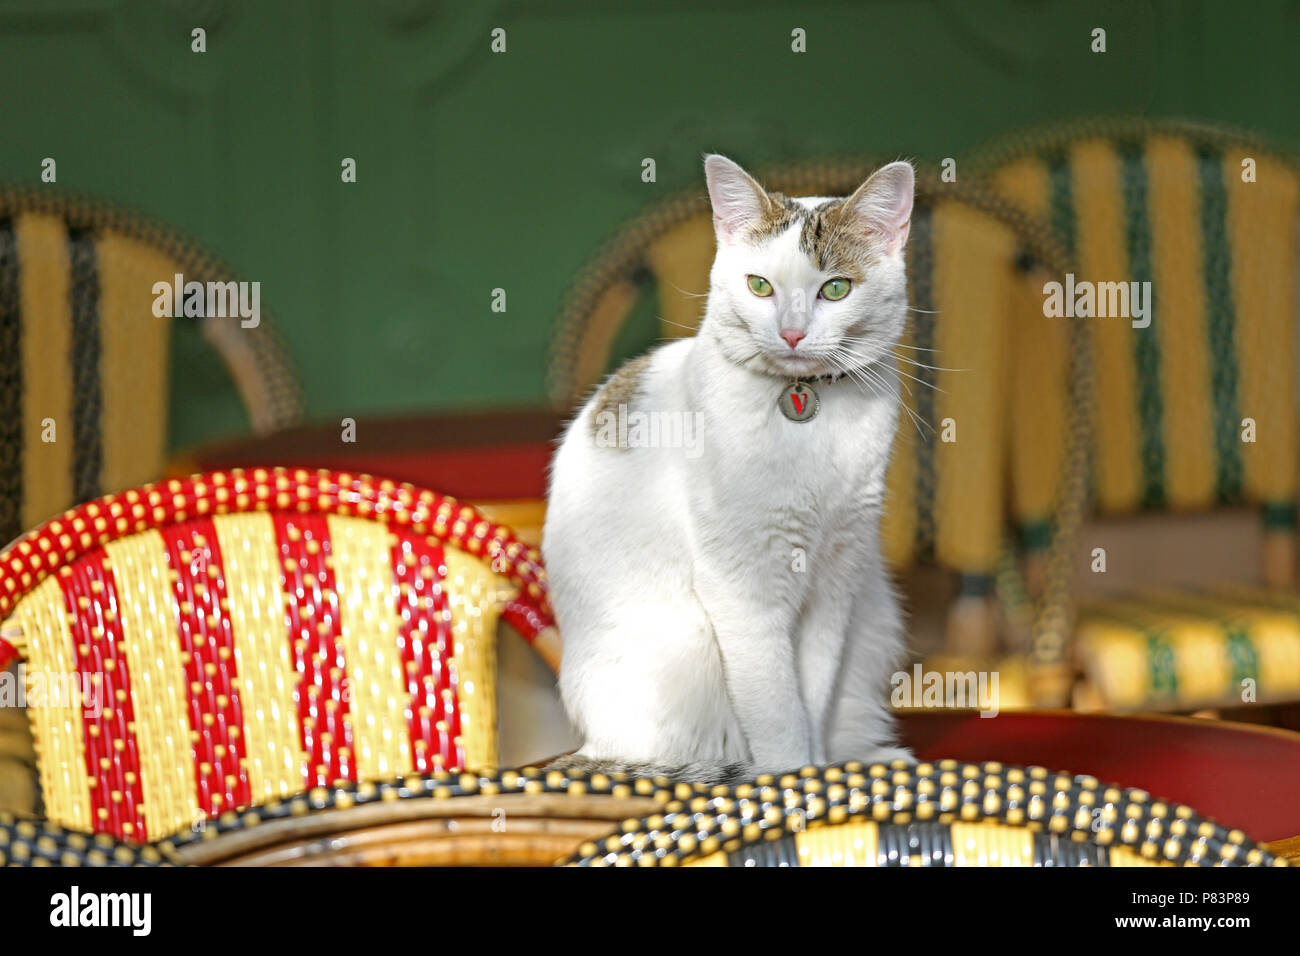 White cat with green eyes sitting on table in cafe, Paris, France, Europe Stock Photo